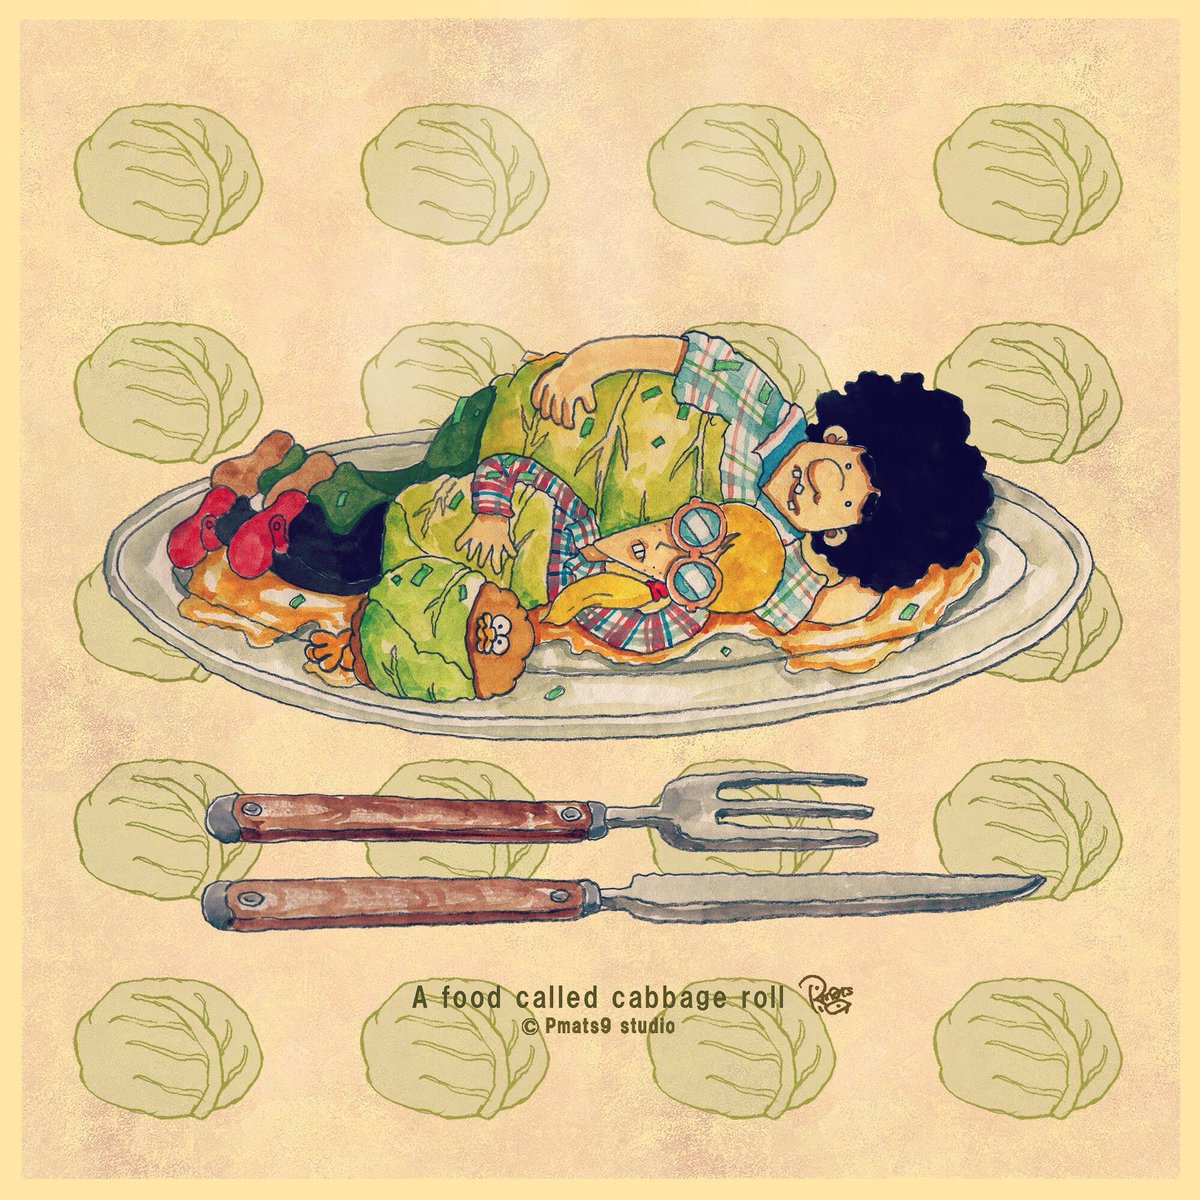 Pmats9 Studio على تويتر A Food Called Cabbage Roll Pmats9 Animation Design Coovo Music Illustration Video Film Illustrator Japan Cabbage Cabbageroll Cook Cooking Delicious アニメーション デザイン イラスト ころもどり ロール